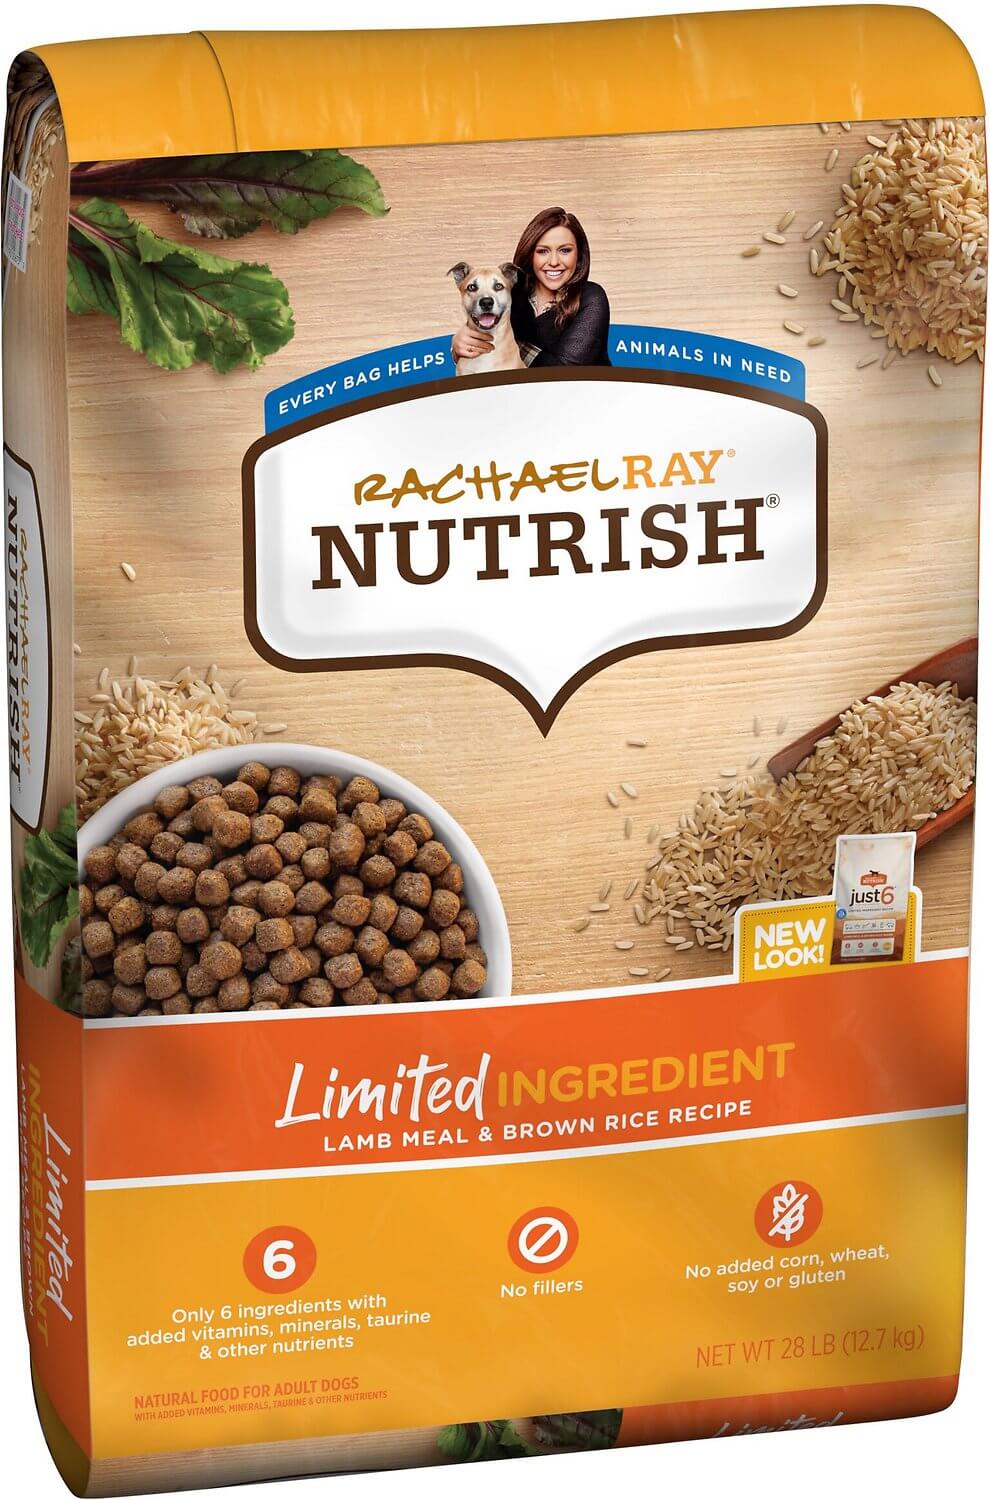 Rachael Ray Nutrish Limited Ingredient Dog Food Review (Dry)